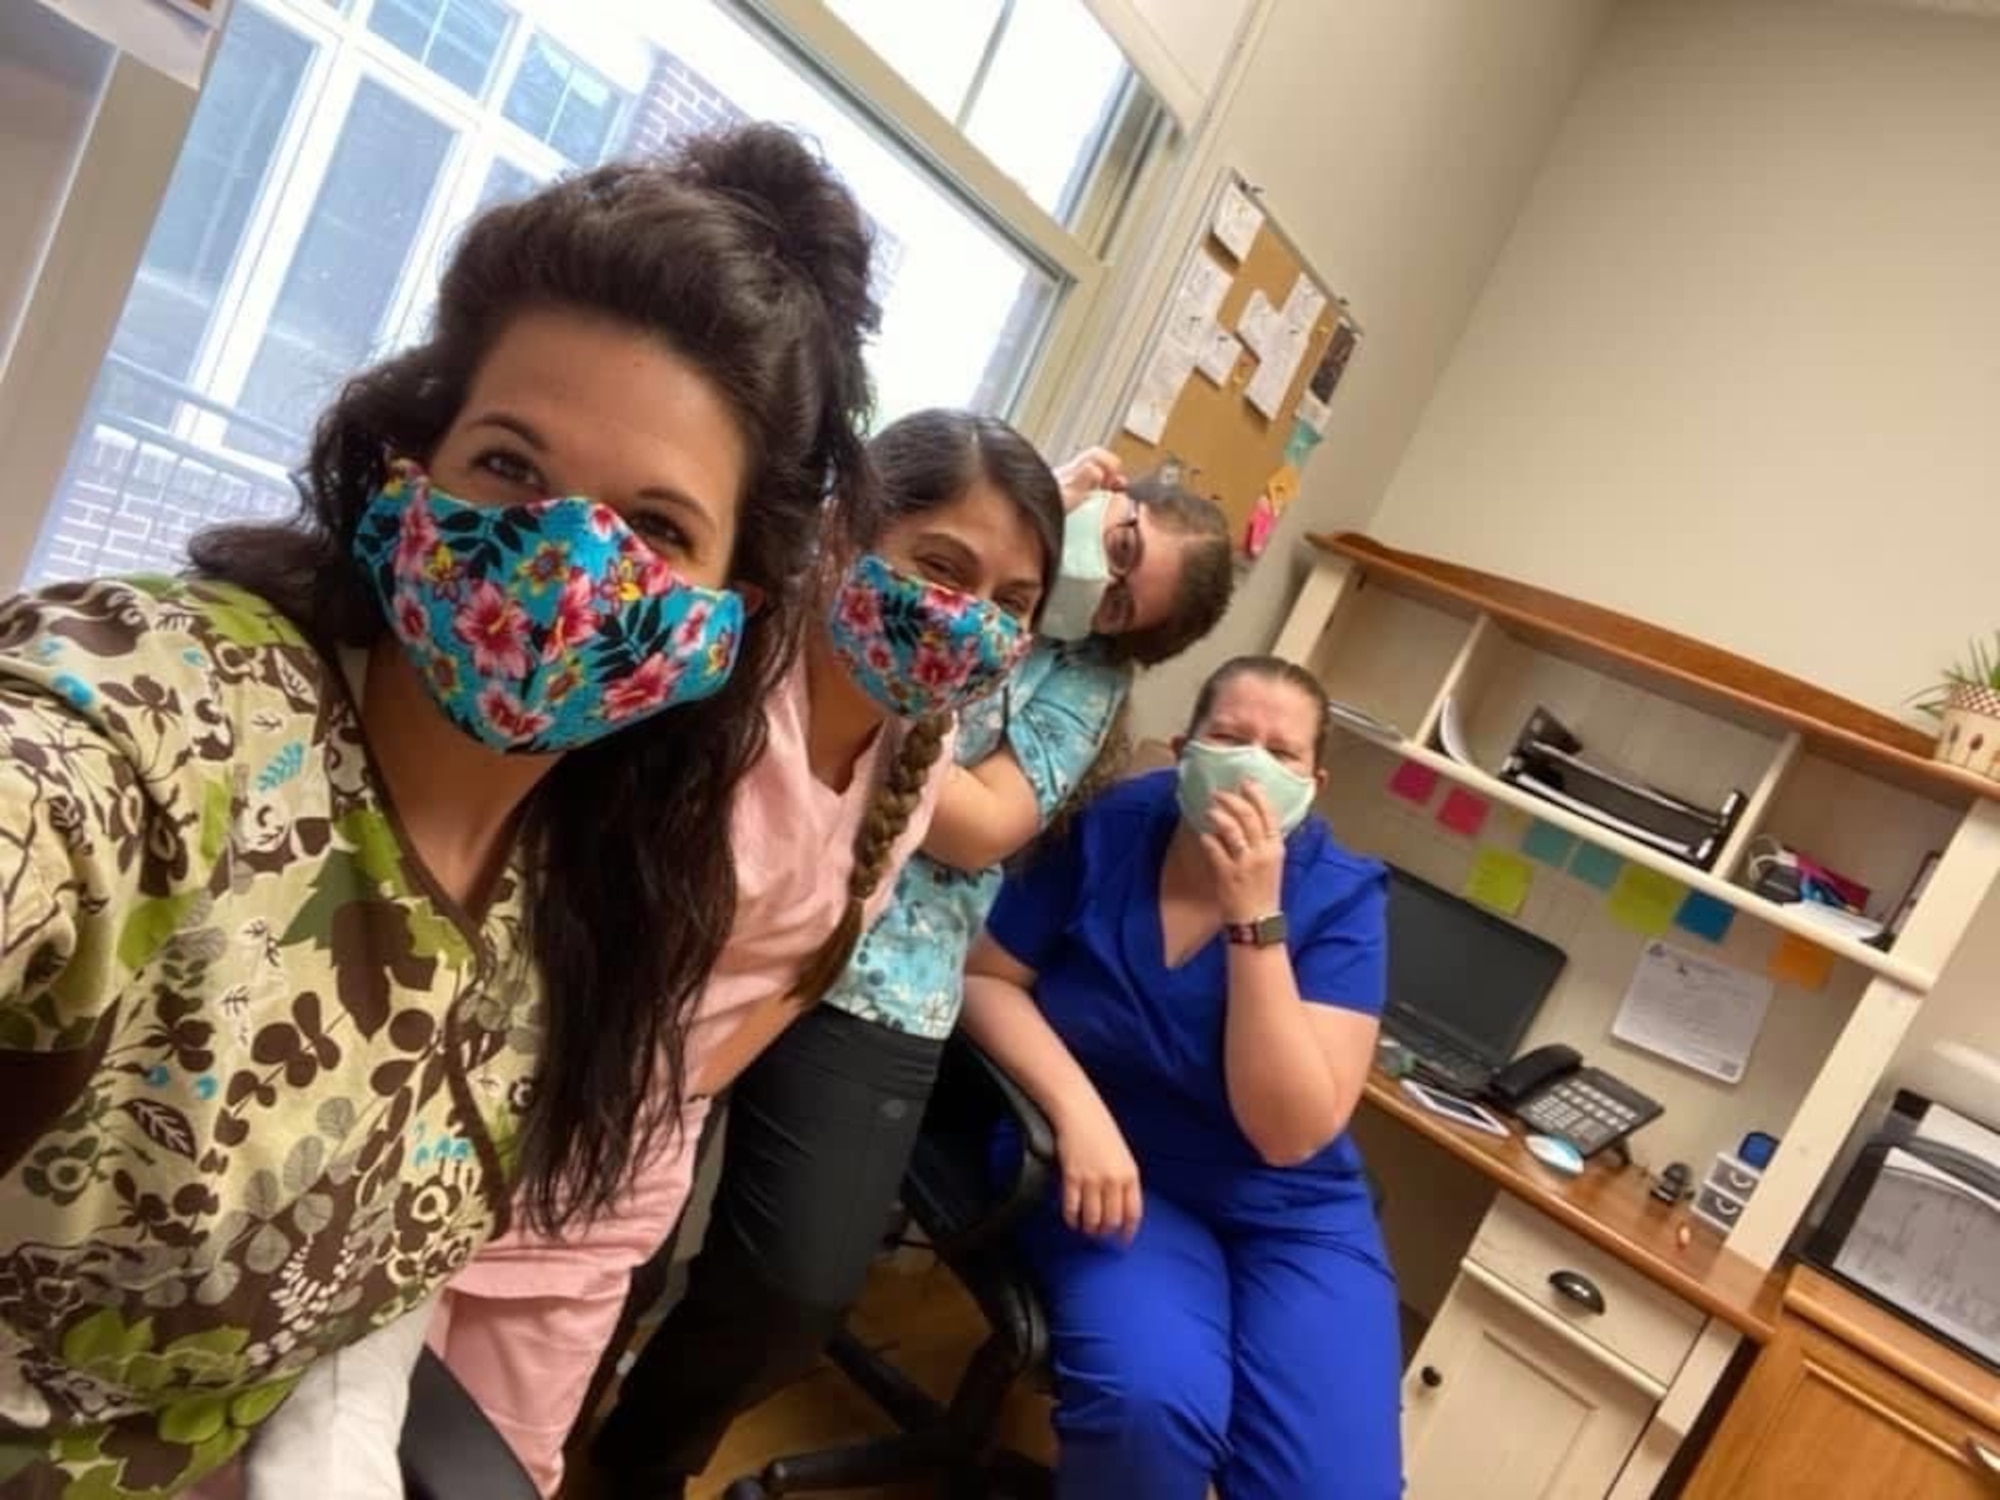 Nurses at The Queen’s Medical Center, Honolulu, Hawaii, wear their masks made and donated by Fight for Aloha, an all-volunteer, non-profit organization. The delivery was coordinated by TSgt Aaron Shields and one of his nurse applicants. (Courtesy photo)